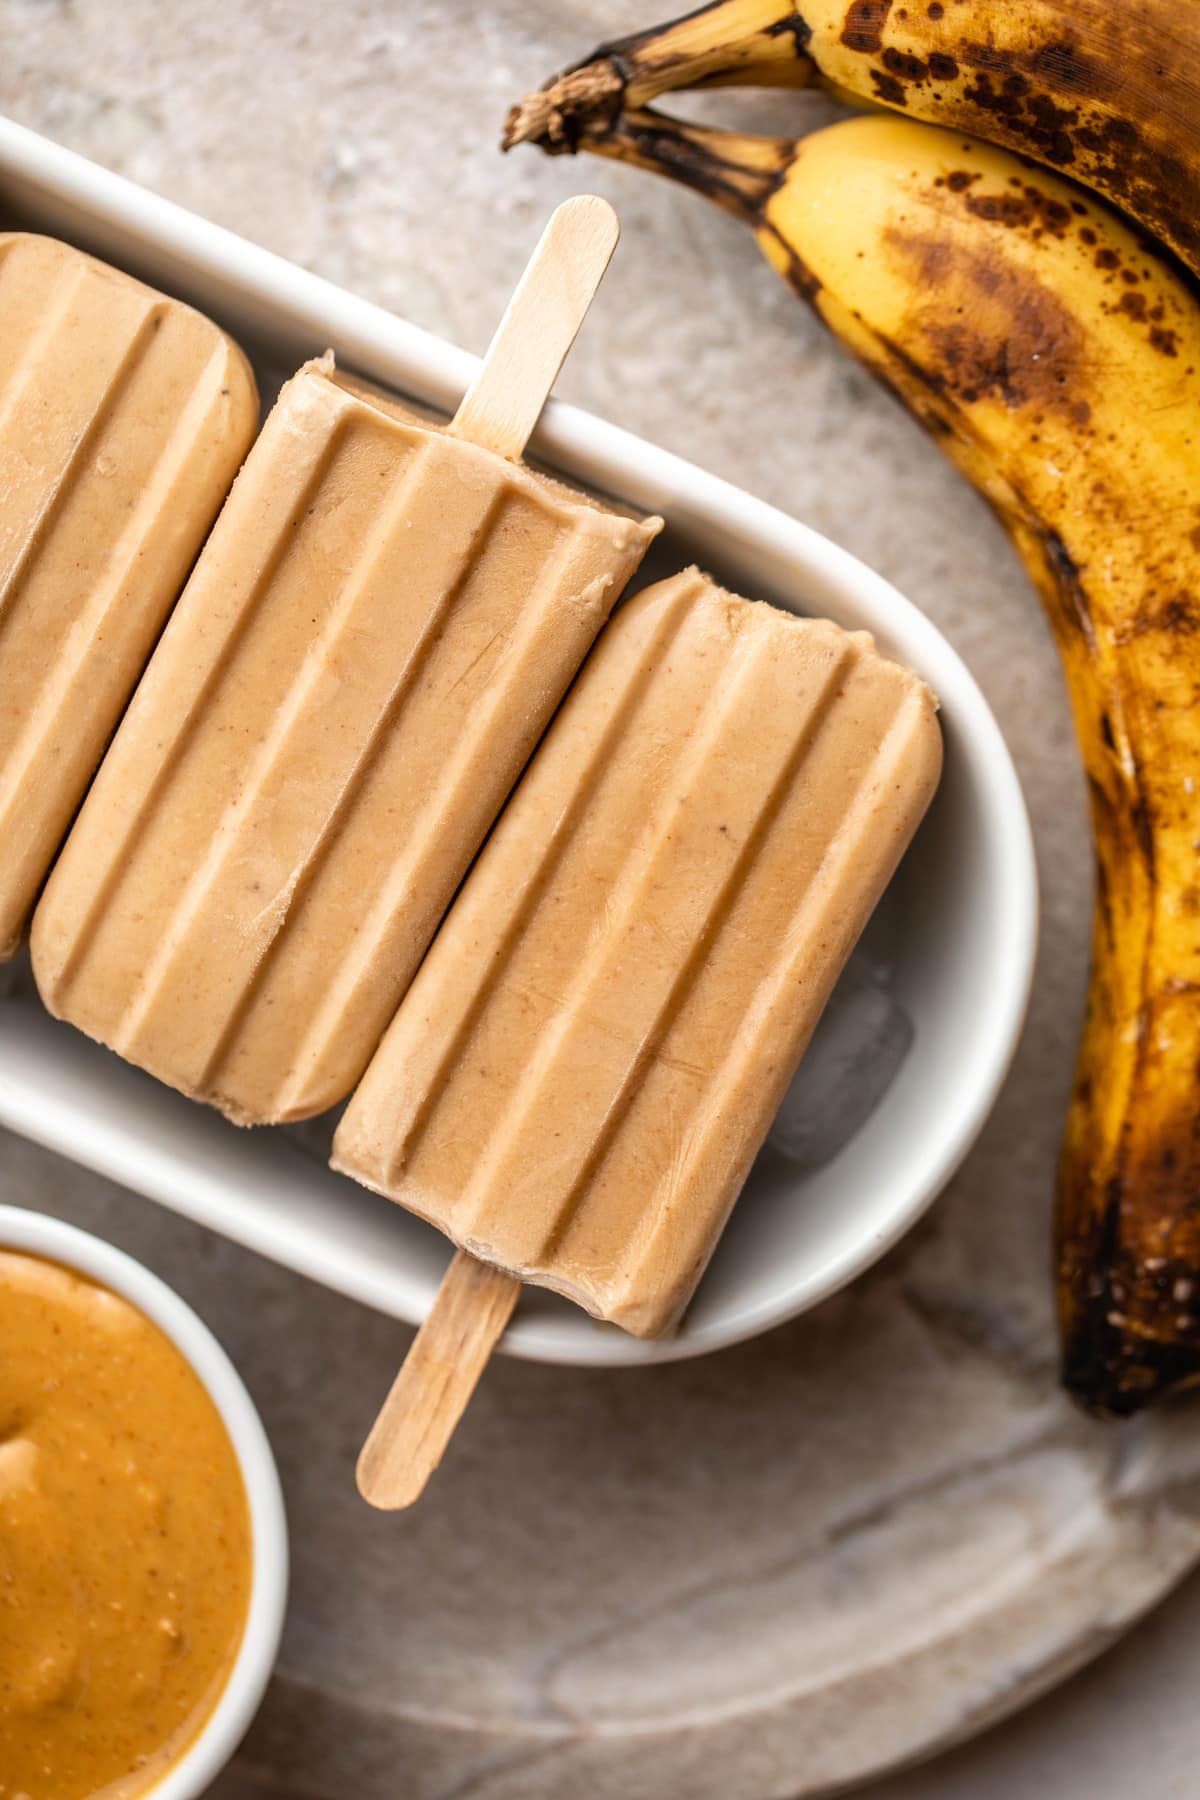 3 peanut butter popsicles with ripe bananas and bowl of peanut butter